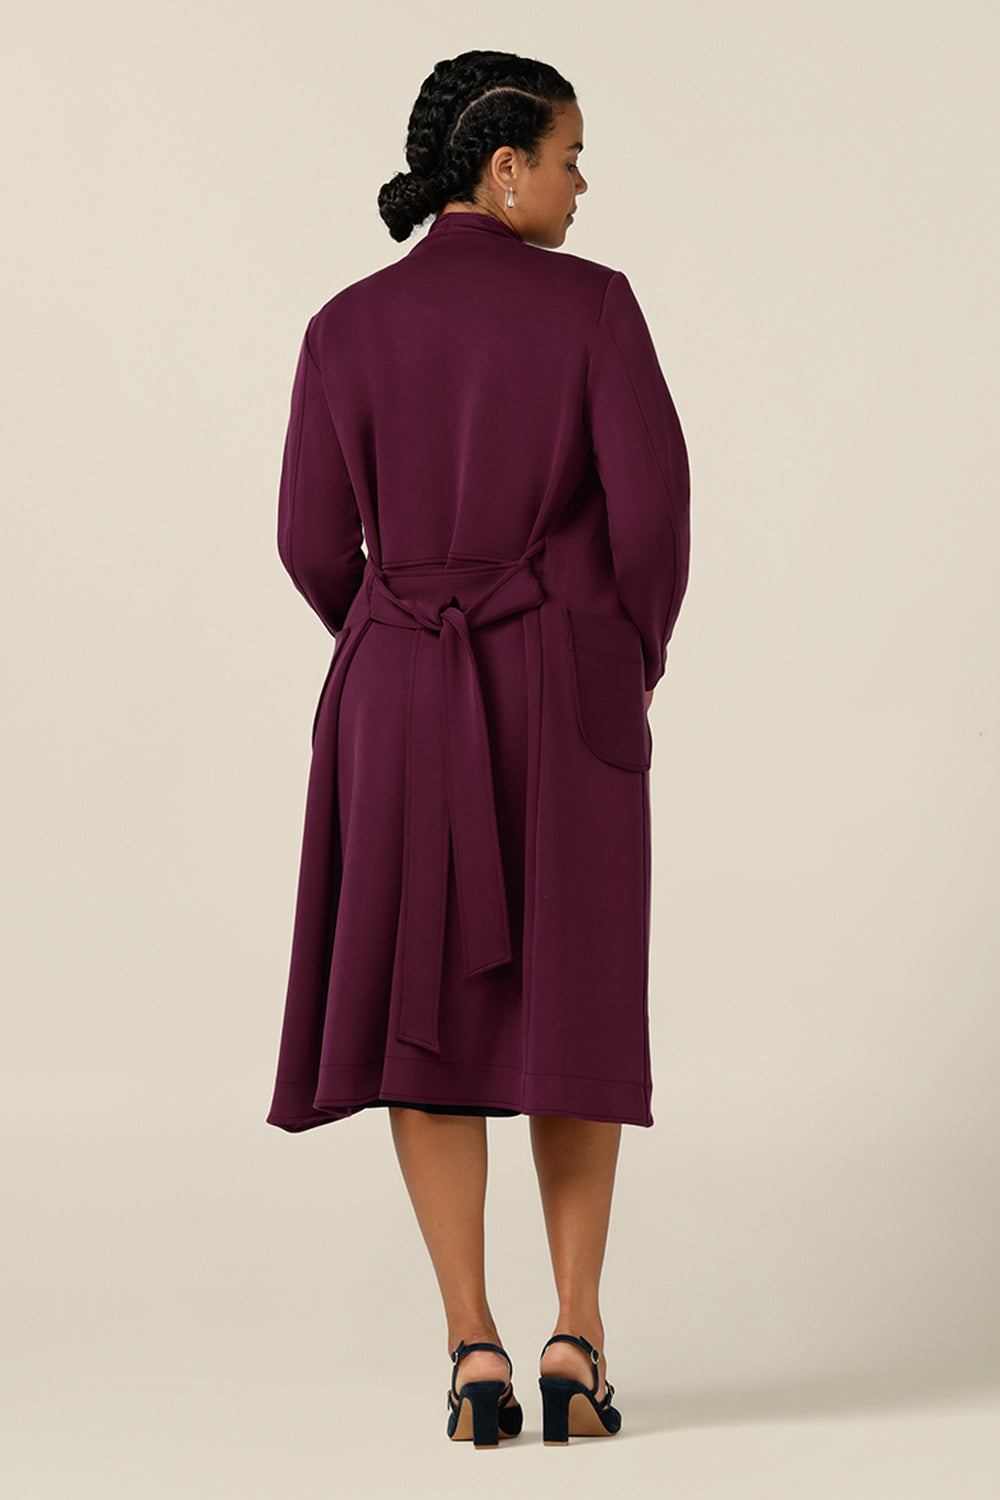 Back view of a size 12, curvy woman wearing a soft tailoring trenchcoat by Australia and New Zealand women's clothing label, L&F. In wine red Modal fabric, this light-weight winter coat is comfortable for layering over workwear and corporate suiting for winter work wear solutions.